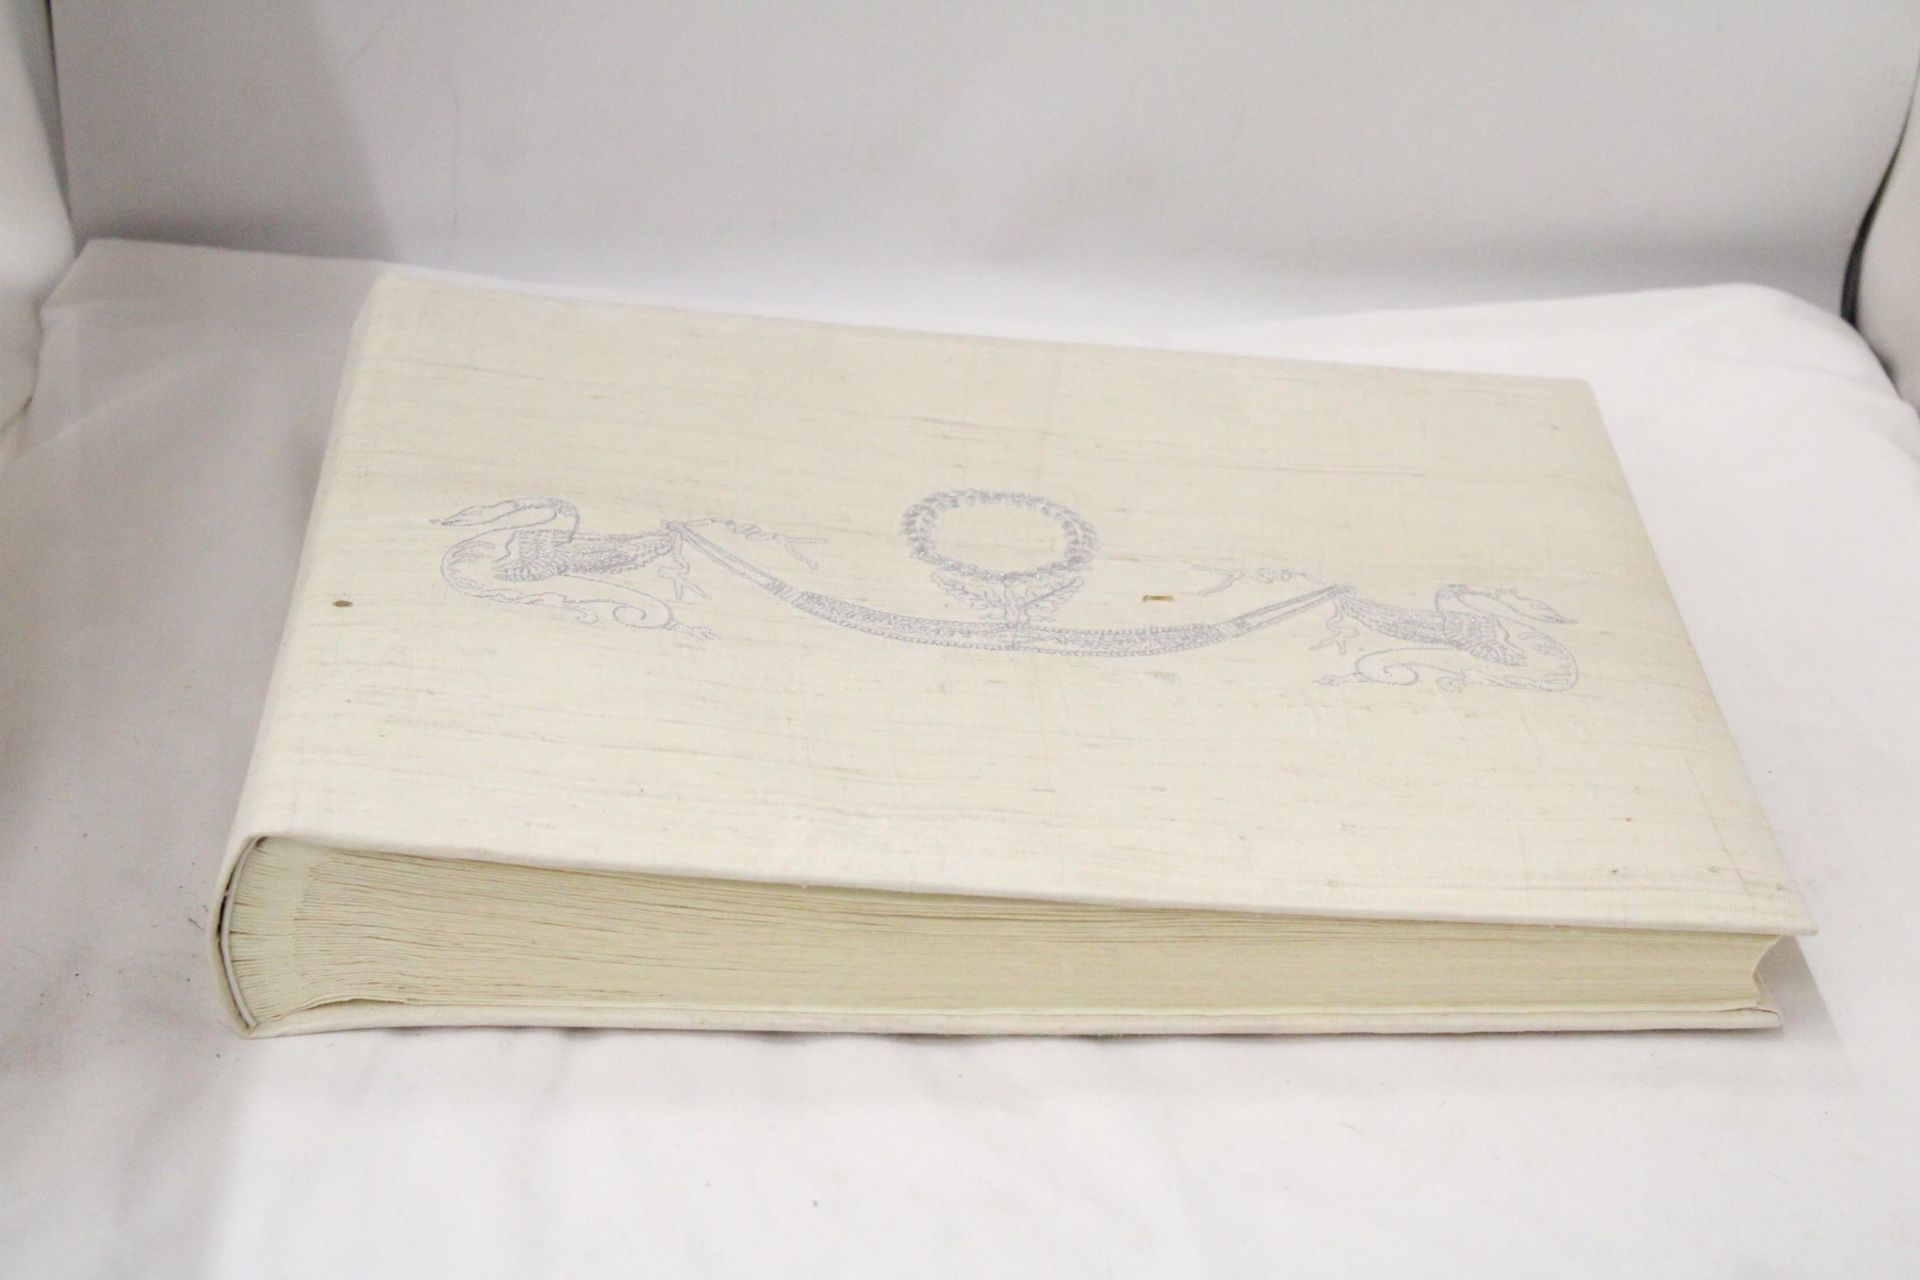 A LARGE PHOTOGRAPH ALBUM WITH AN EMBROIDERED SILK COVER - Image 3 of 4